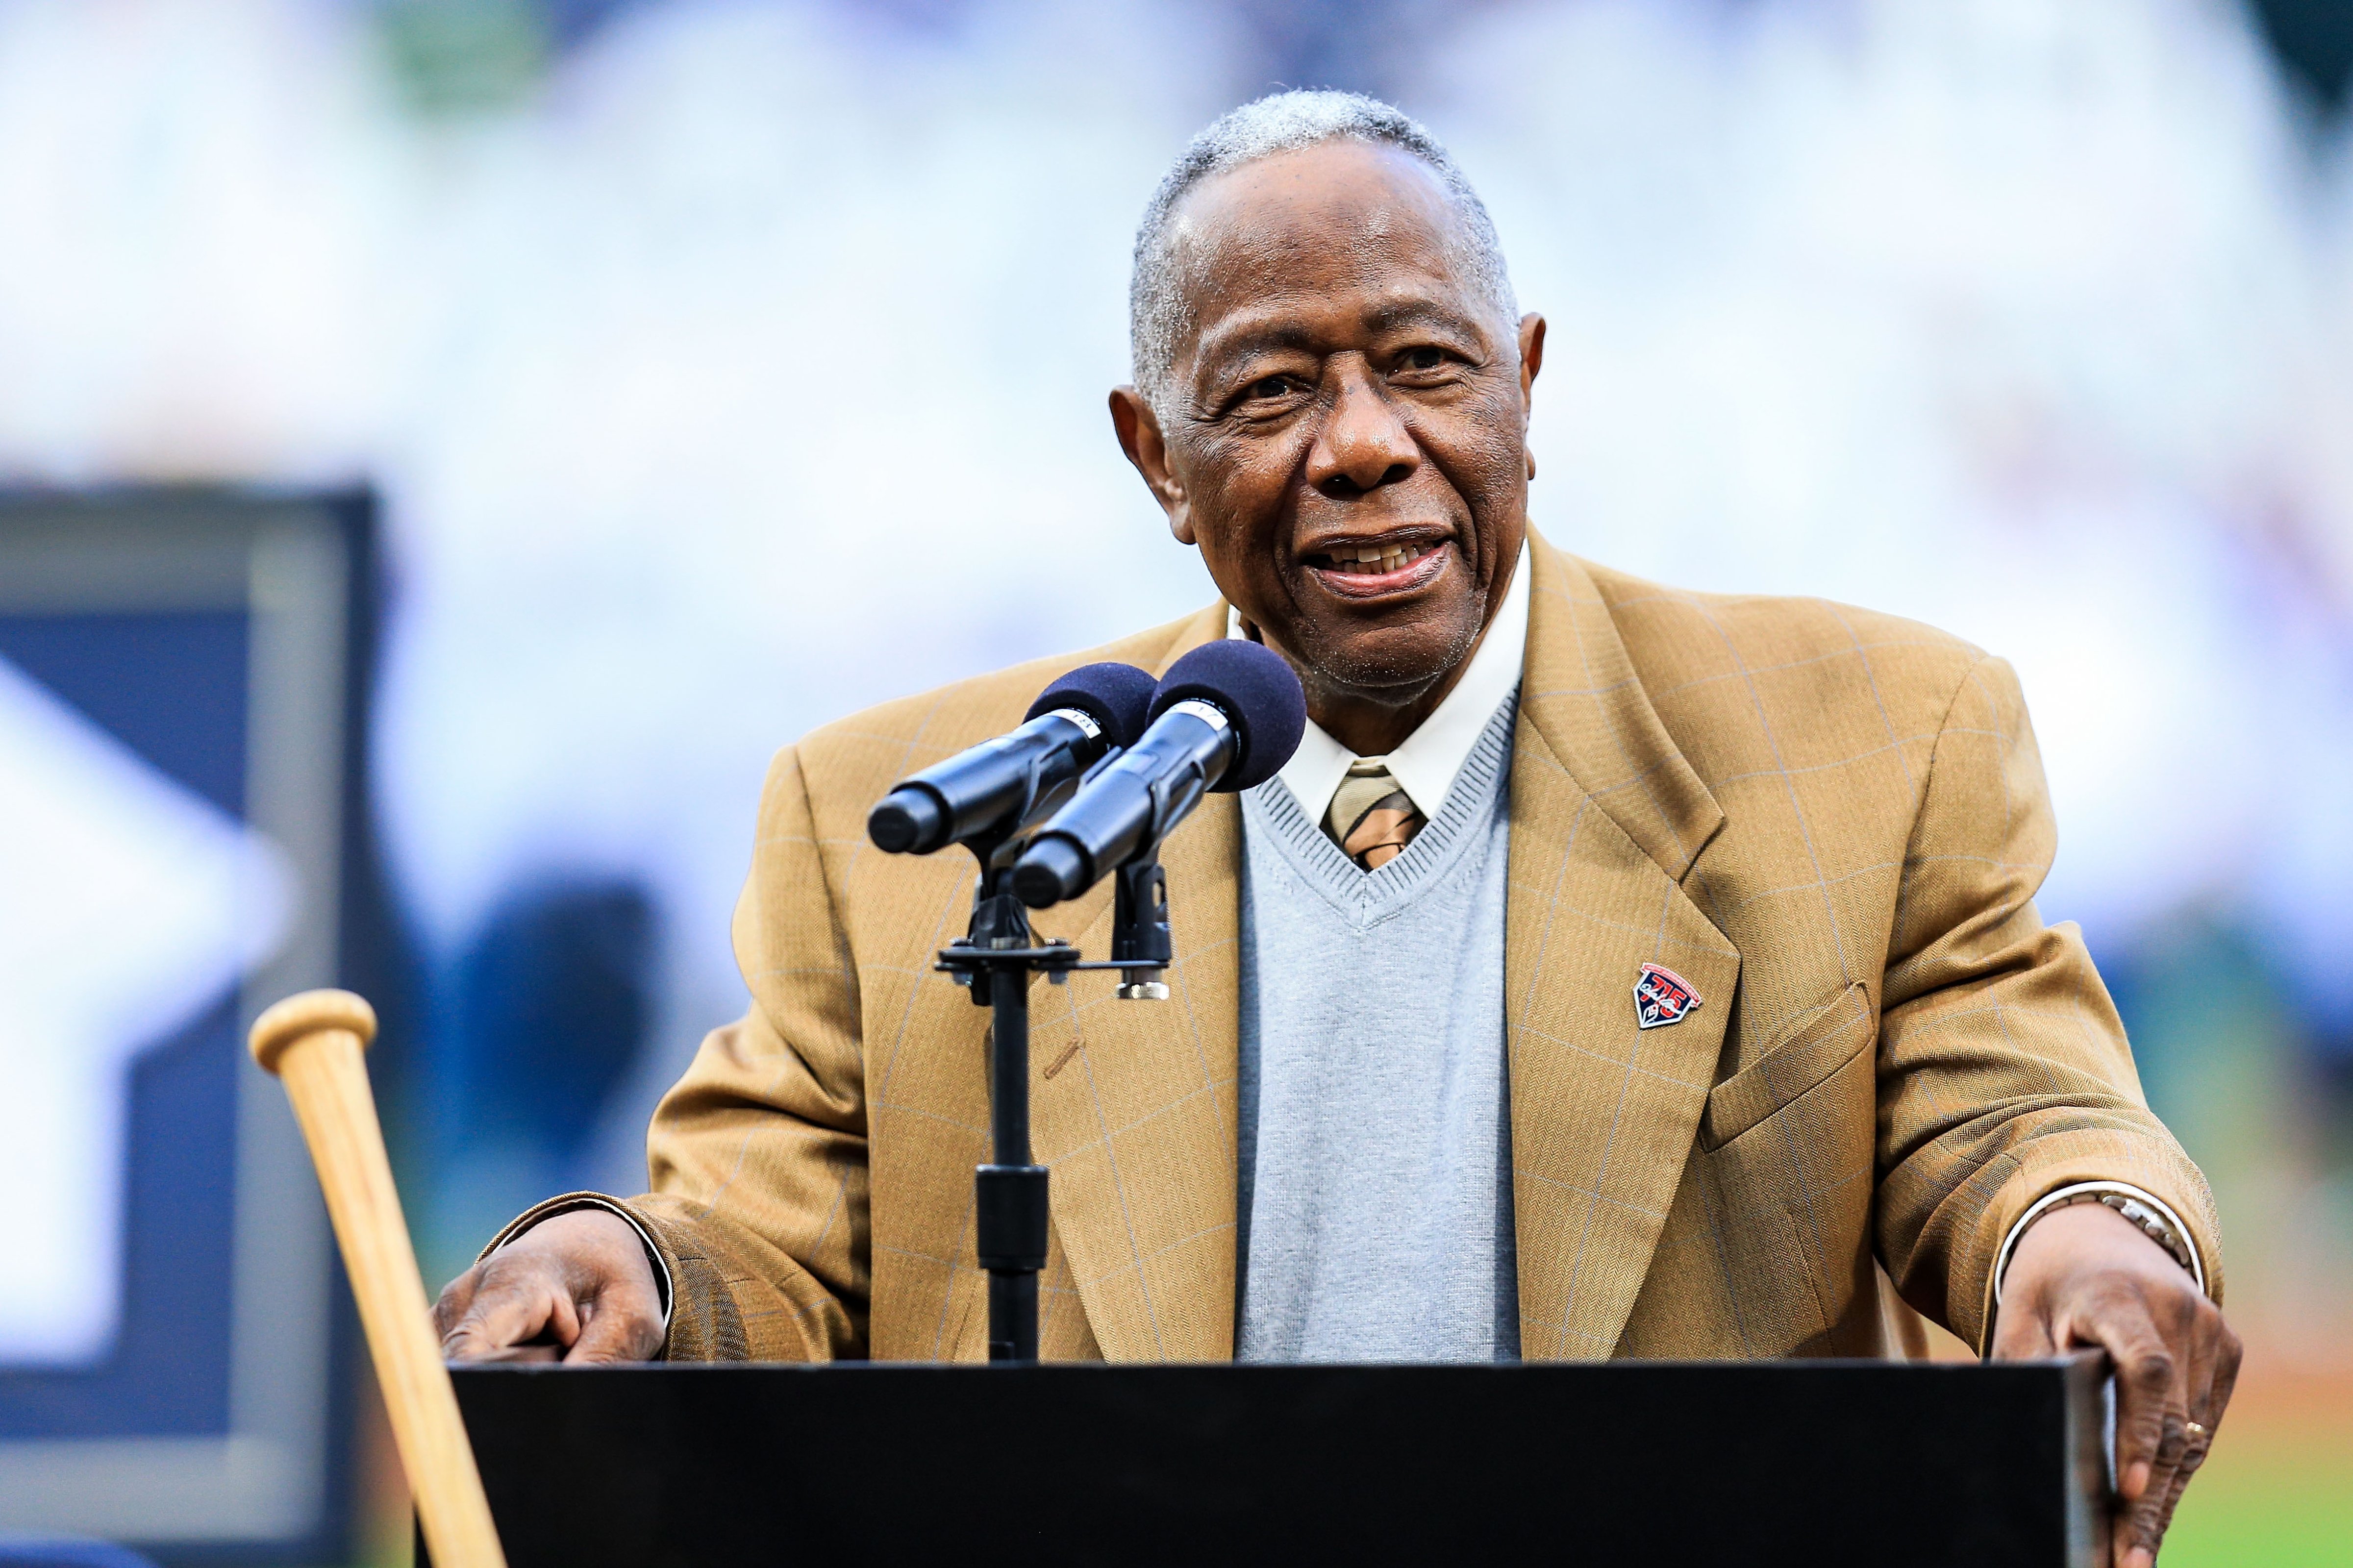 Former Atlanta Brave Hank Aaron speaks during a ceremony honoring the 40th anniversary of his 715th home run at Turner Field, Atlanta, on Apr 8, 2014 (Daniel Shirey—USA Today Sports)